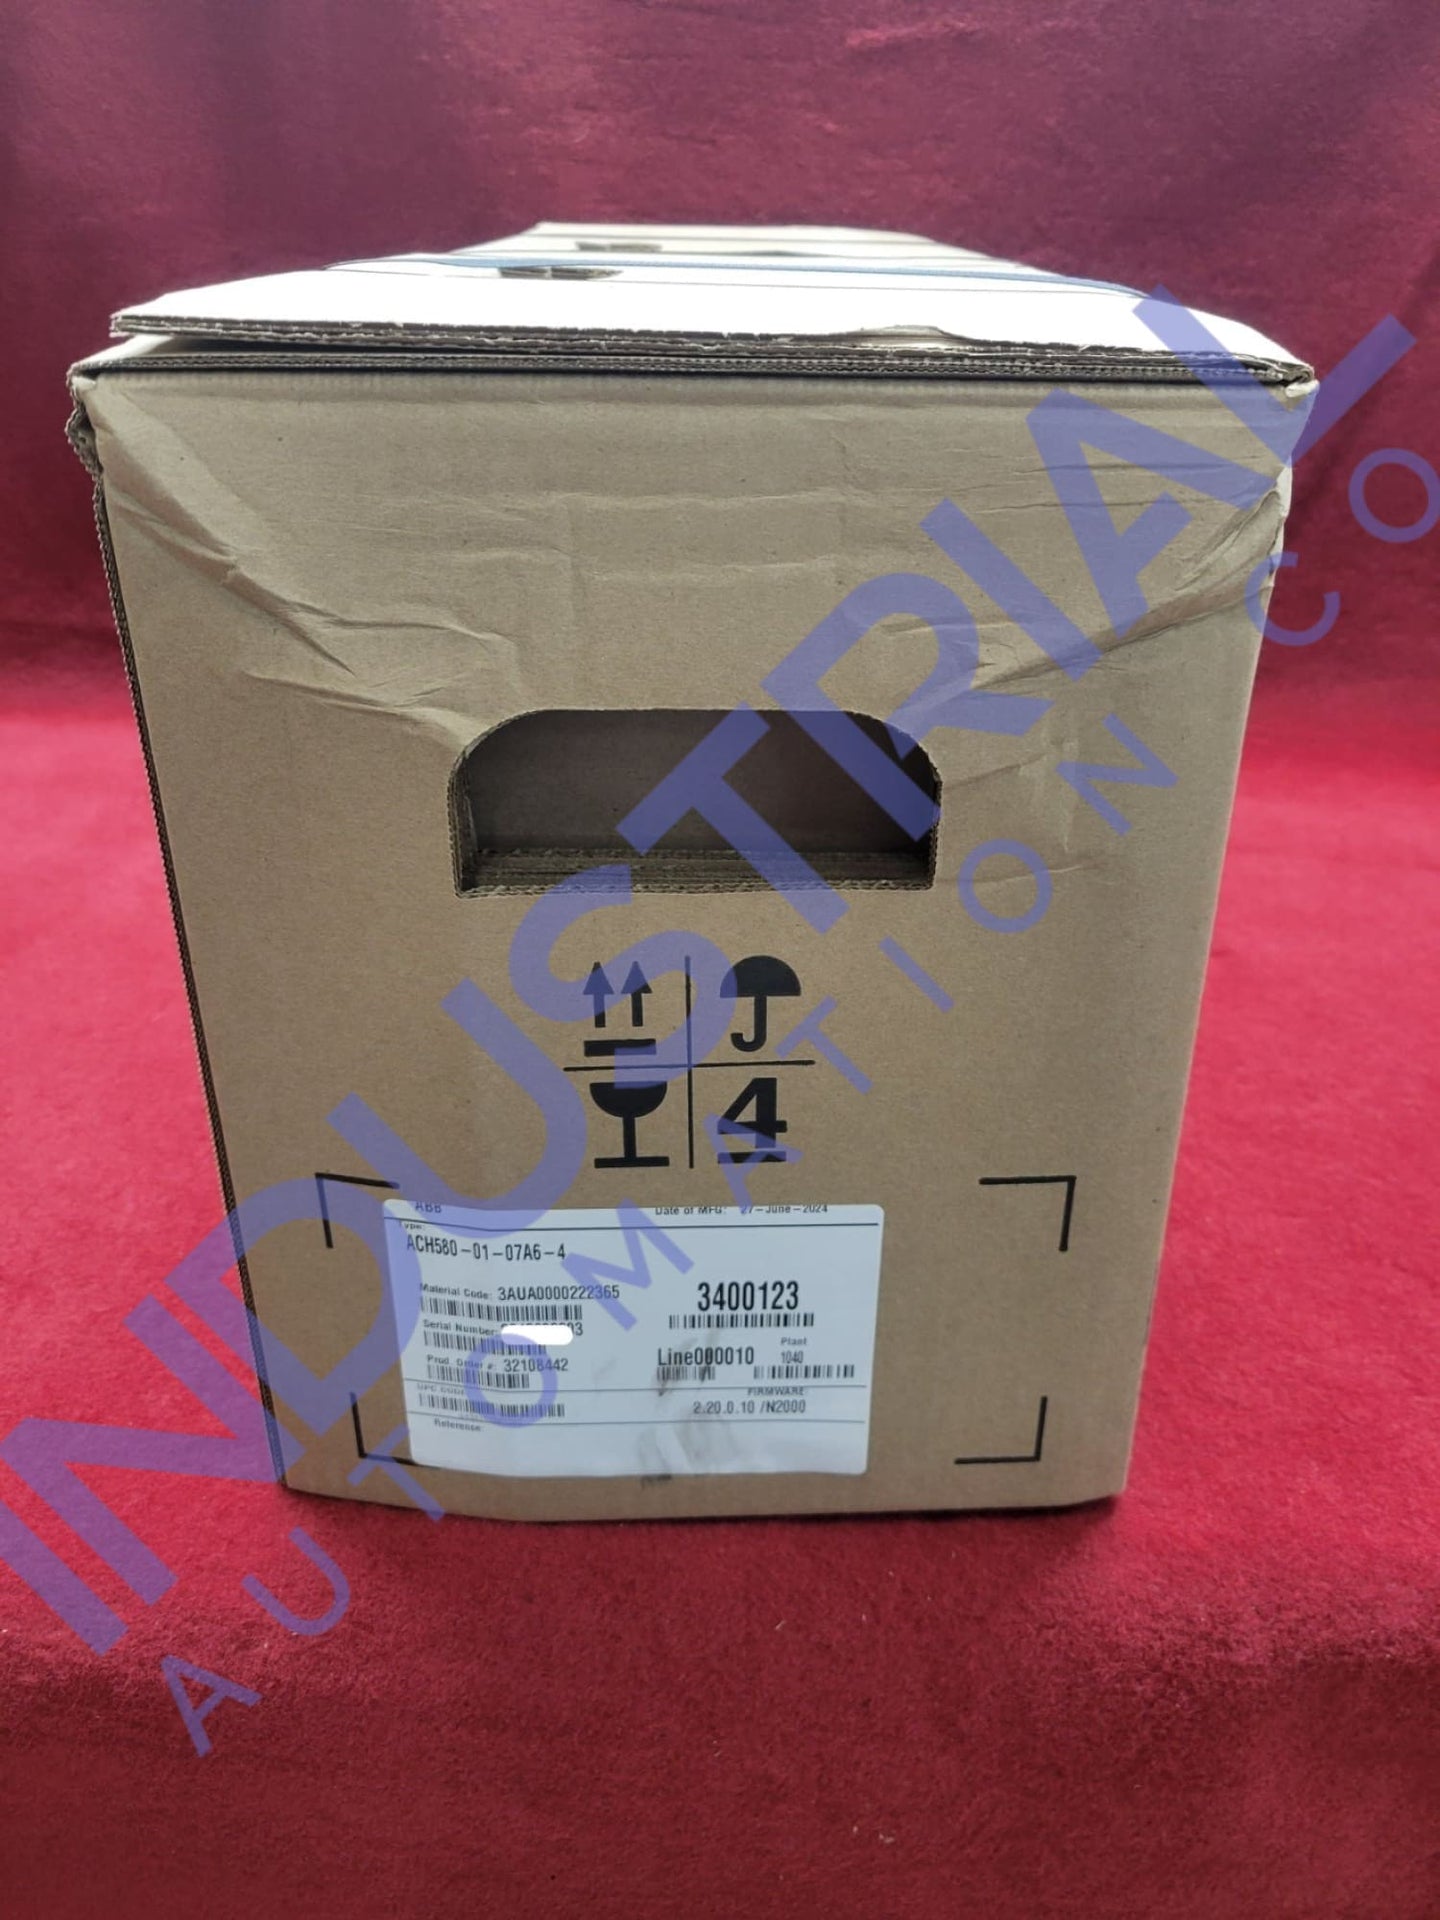 Abb Ach580-01-07A6-4 Adjustable Frequency Ac Drive